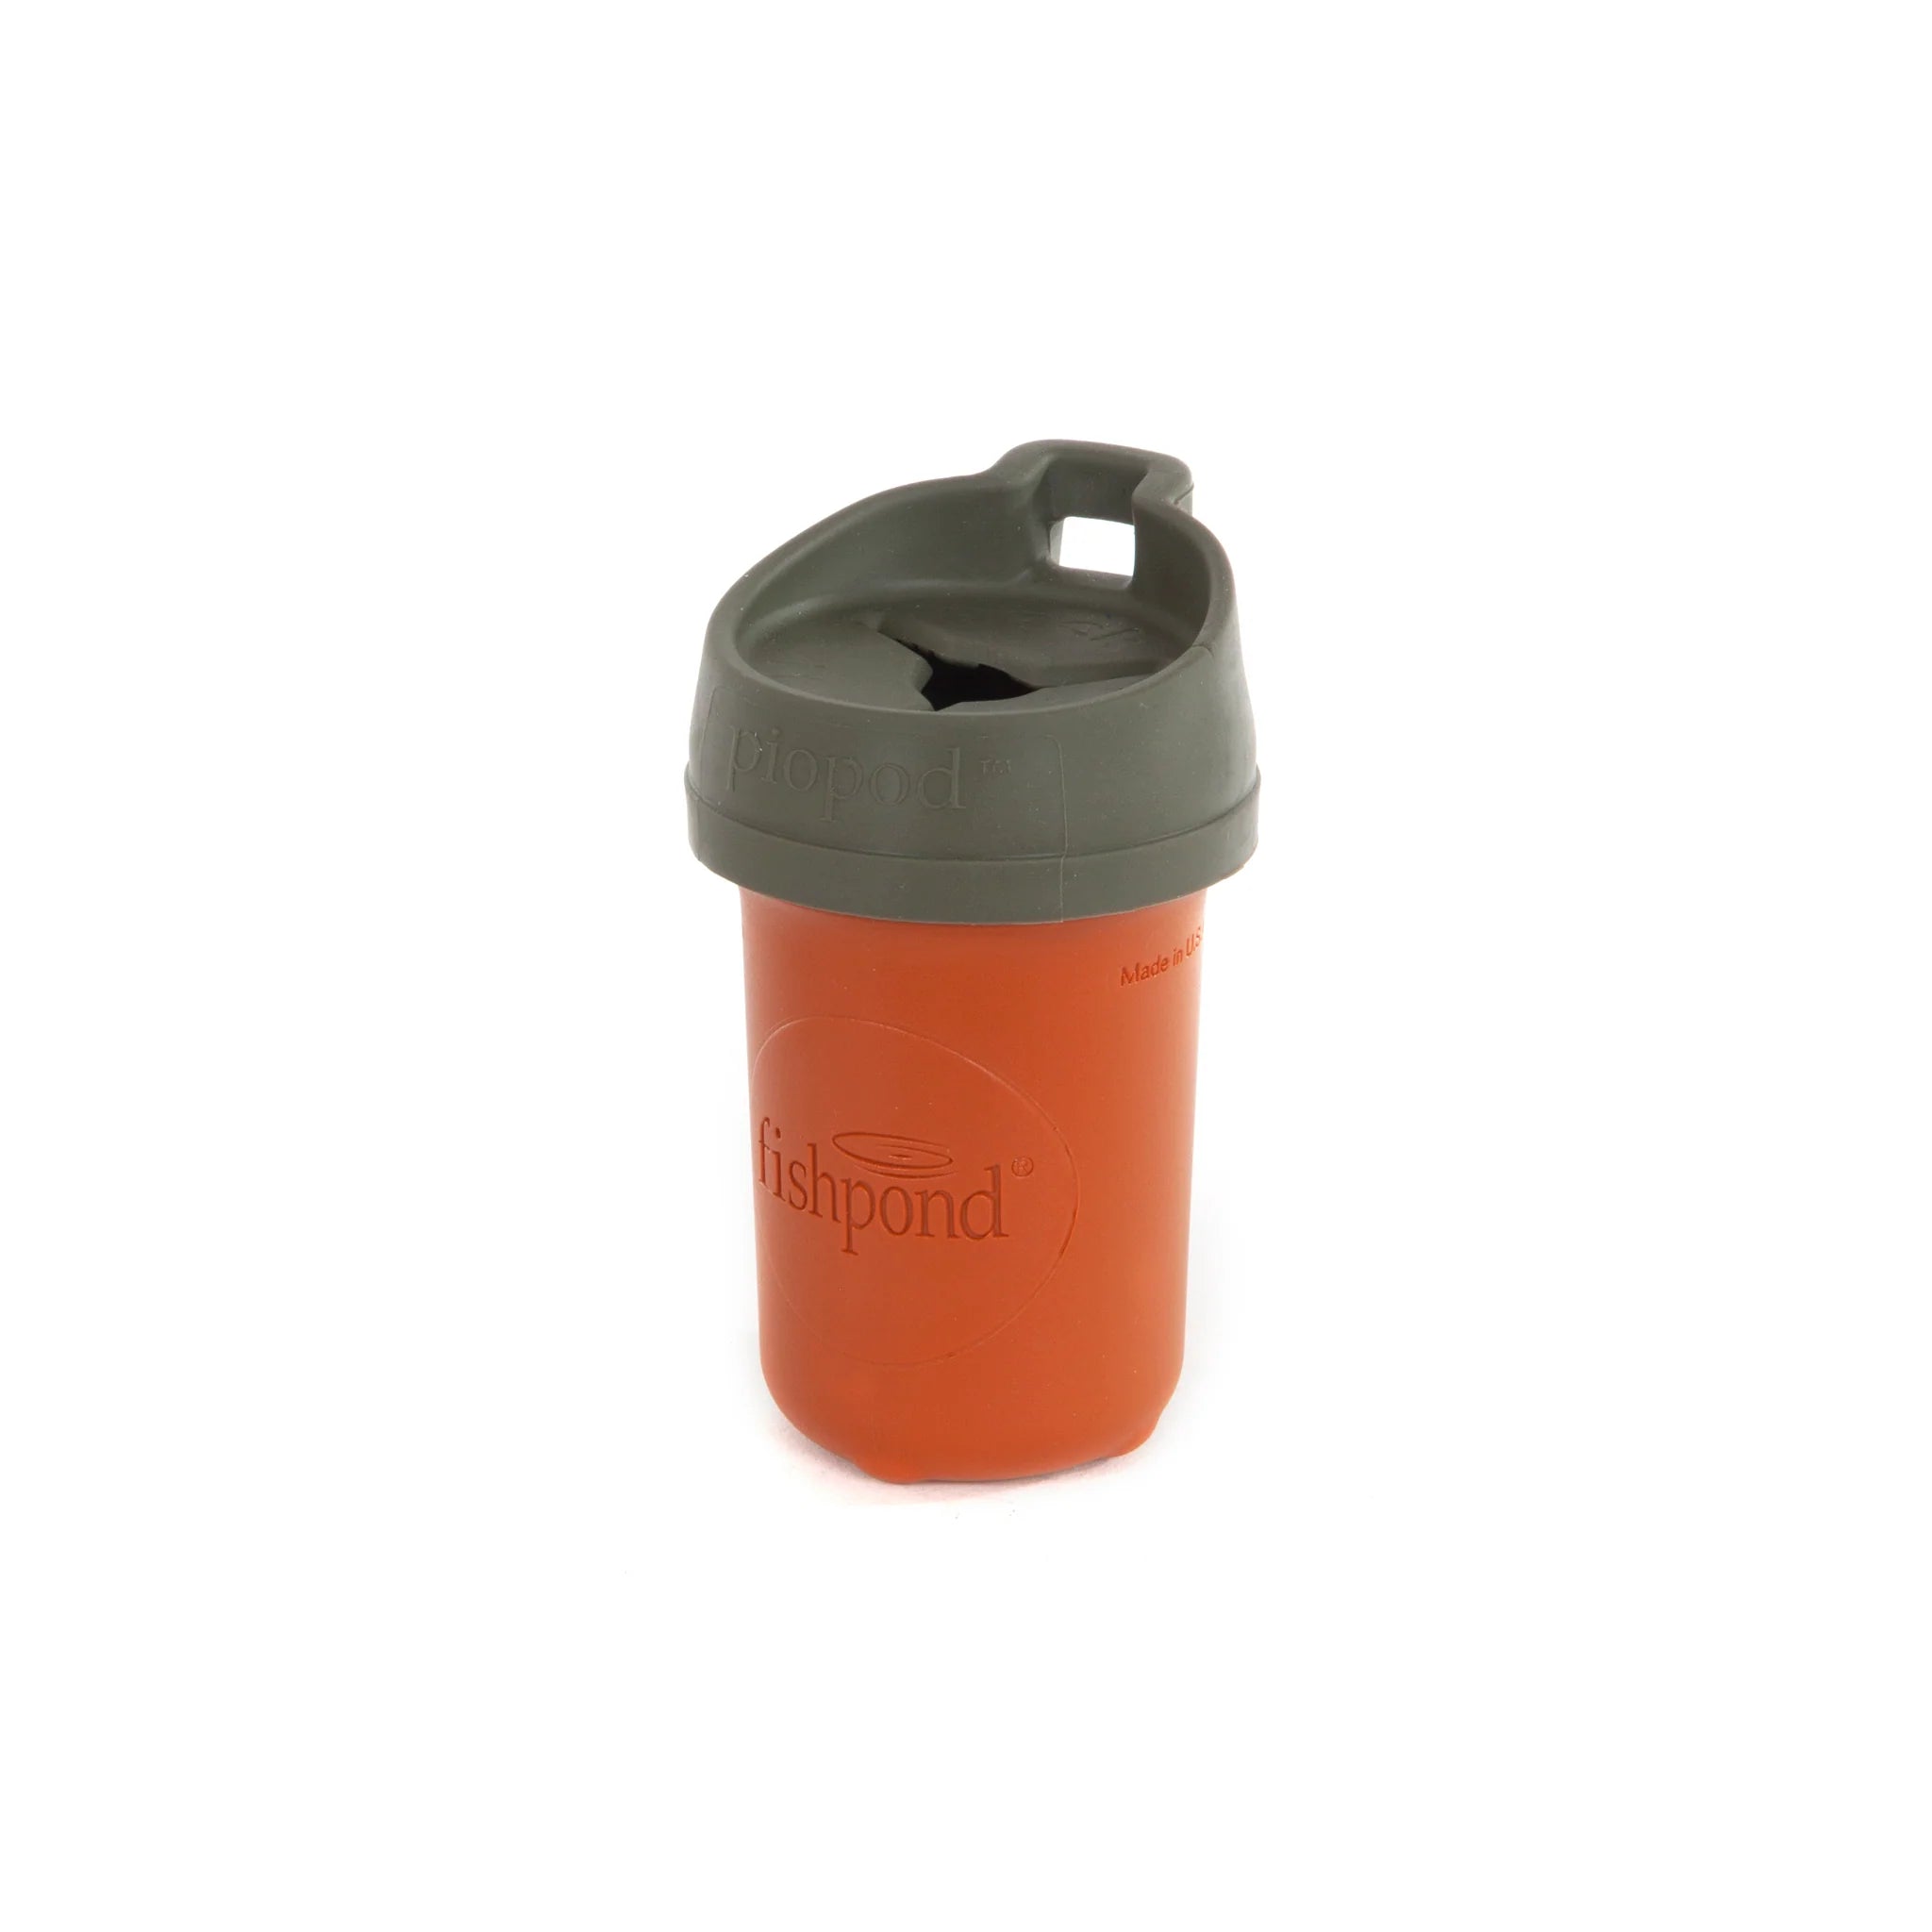 Fishpond Microtrash Container Piopod